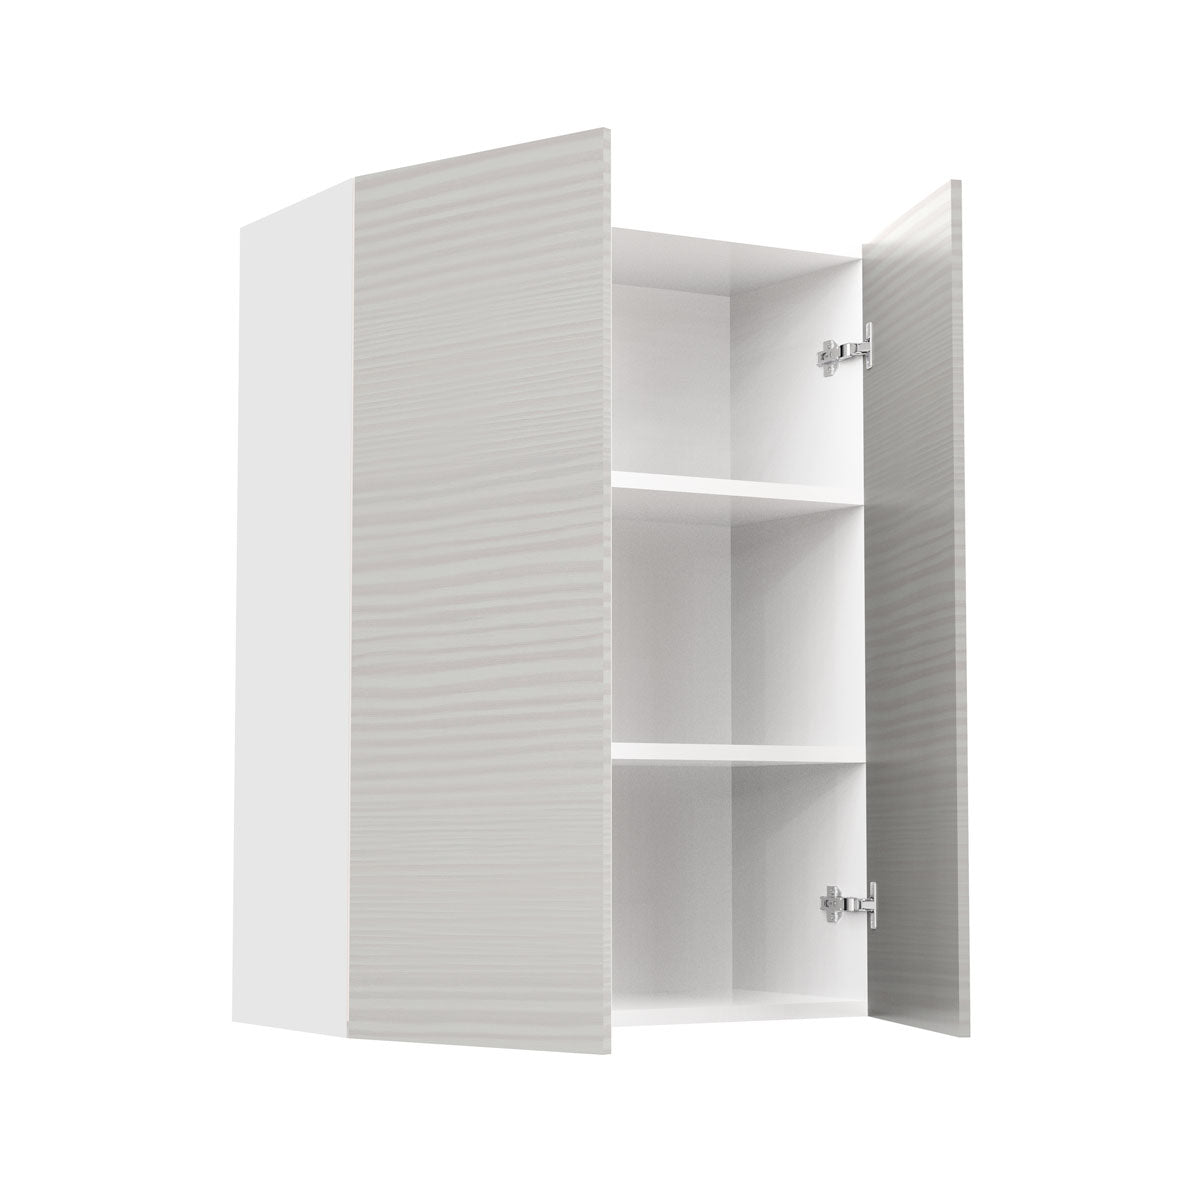 RTA - Pale Pine - Double Door Wall Cabinets | 27"W x 36"H x 12"D